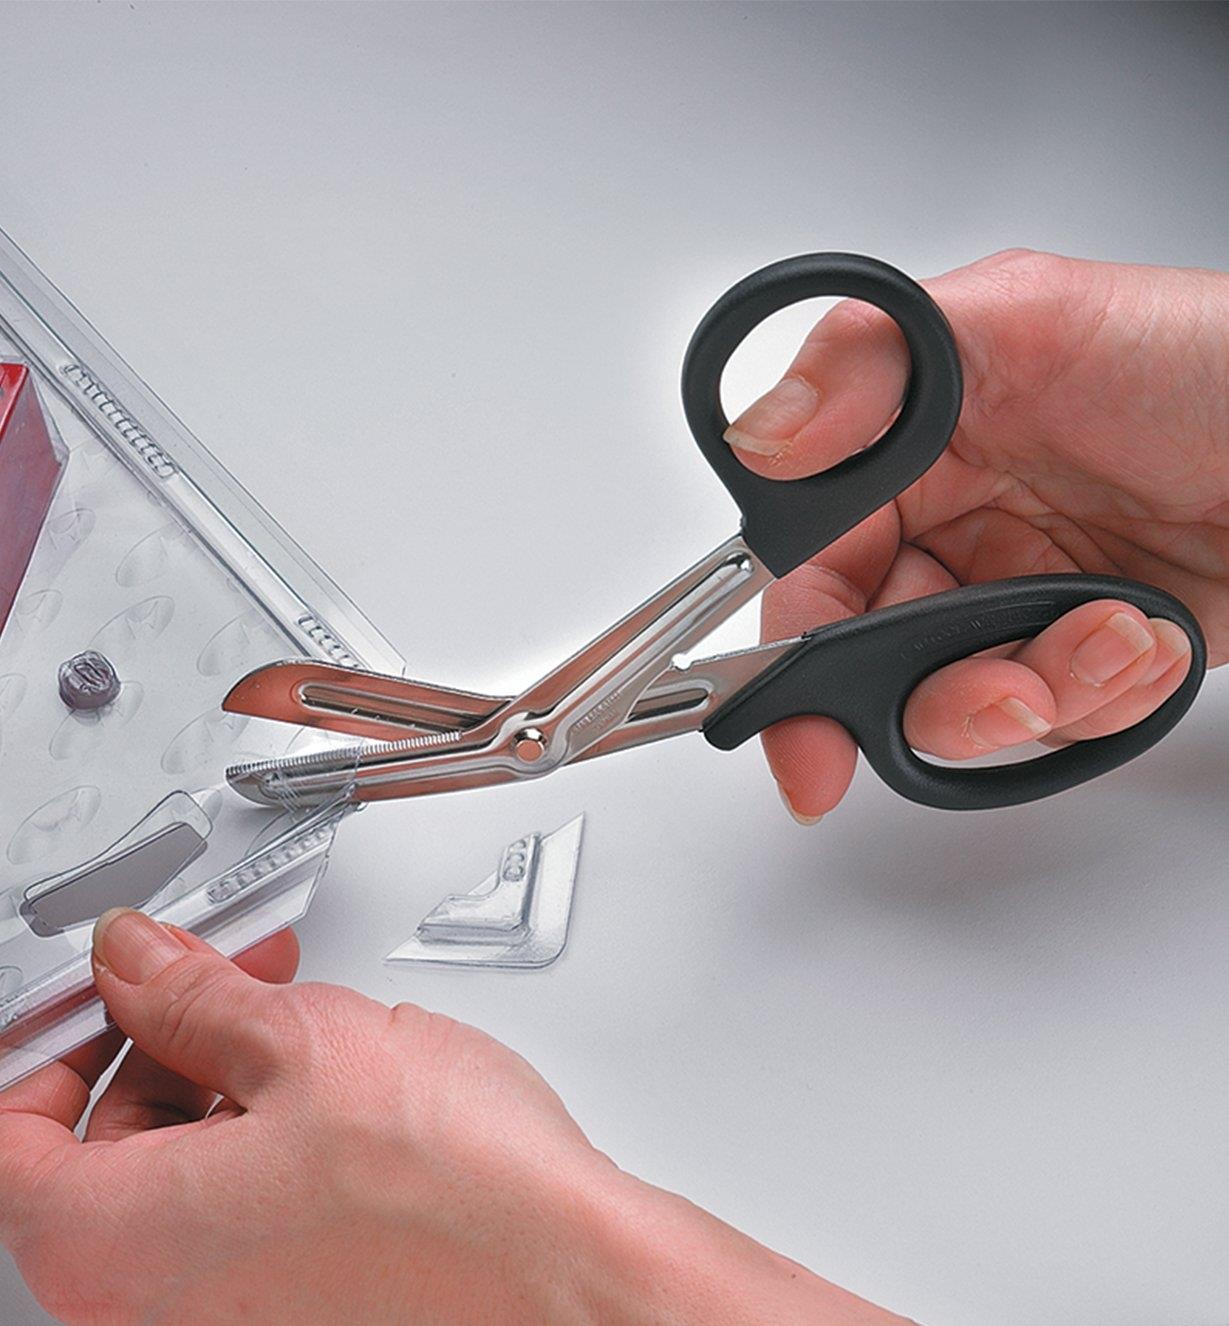 Cutting through clamshell packaging with Clamshell Scissors